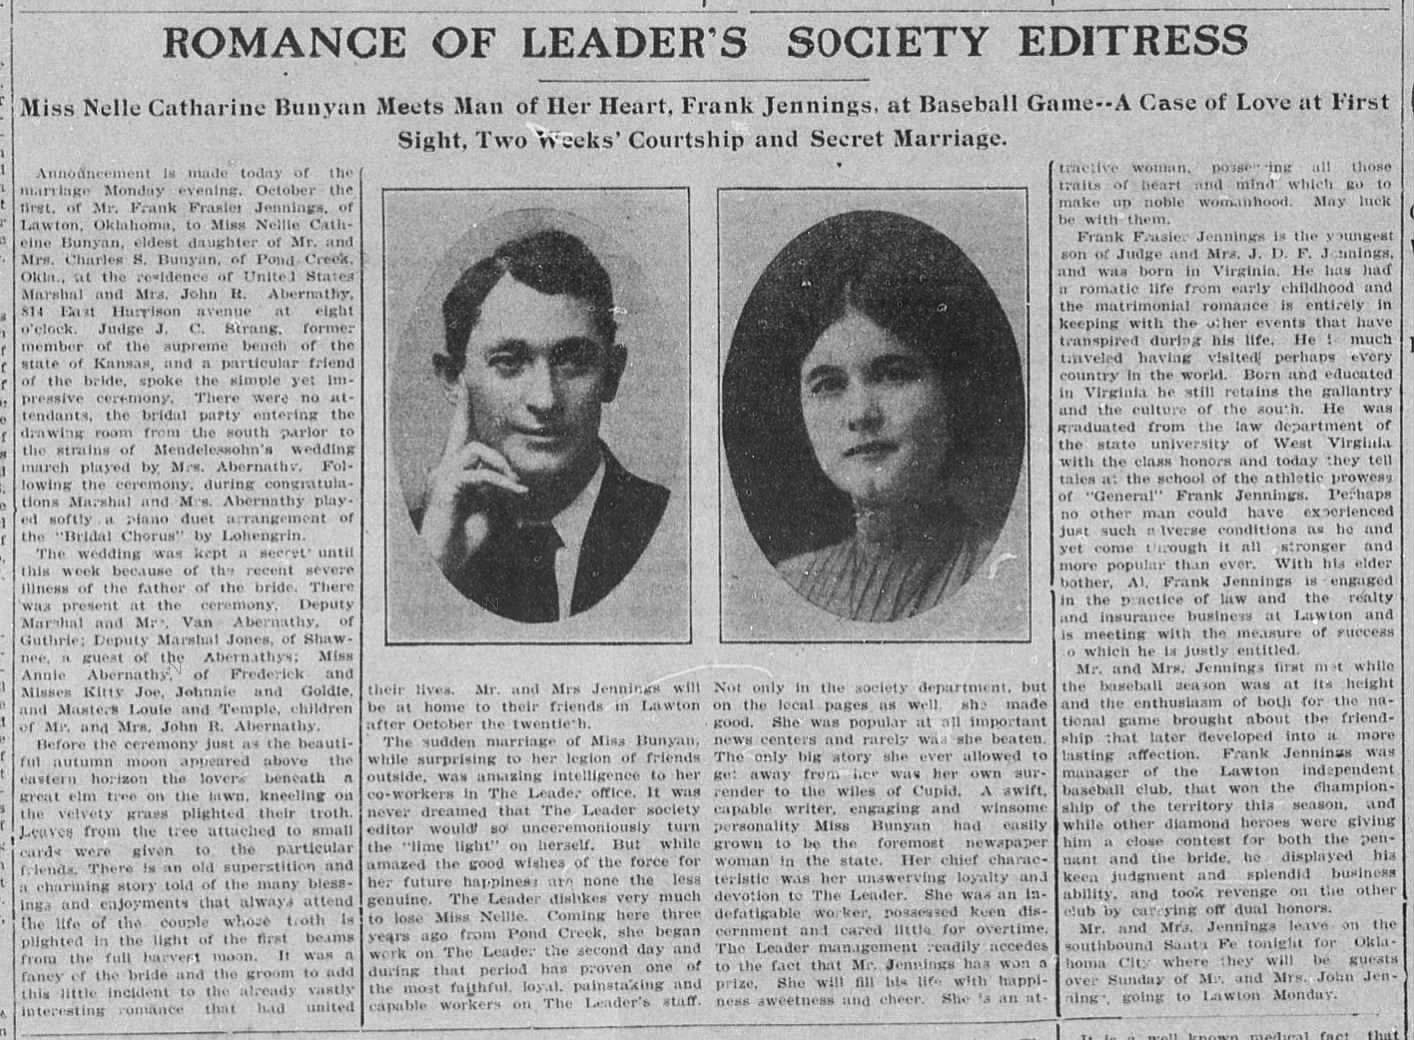 Romance of Leader's Society Editress; The Guthrie Daily Leader, Oct. 13, 1906, p. 2